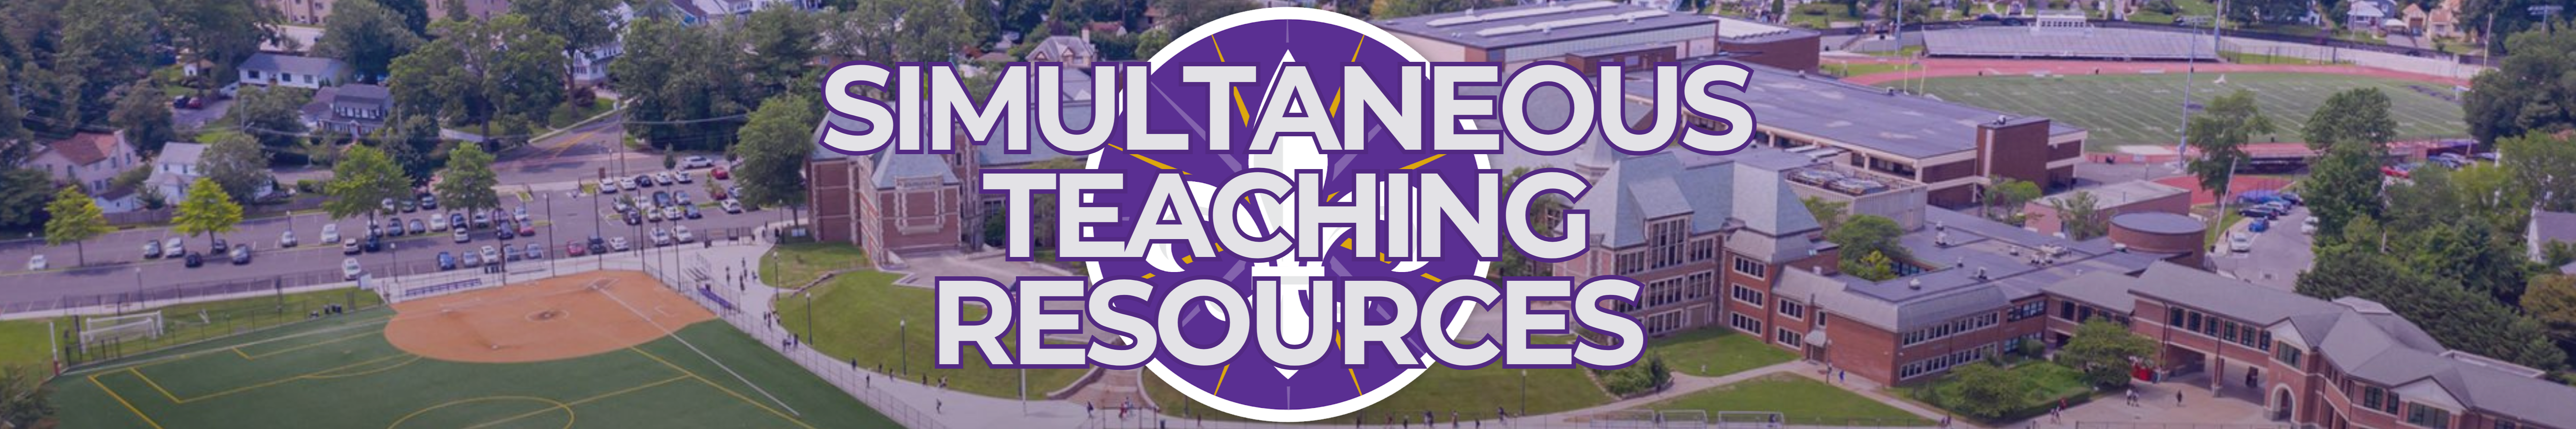 Simultaneous Teaching Resources banner